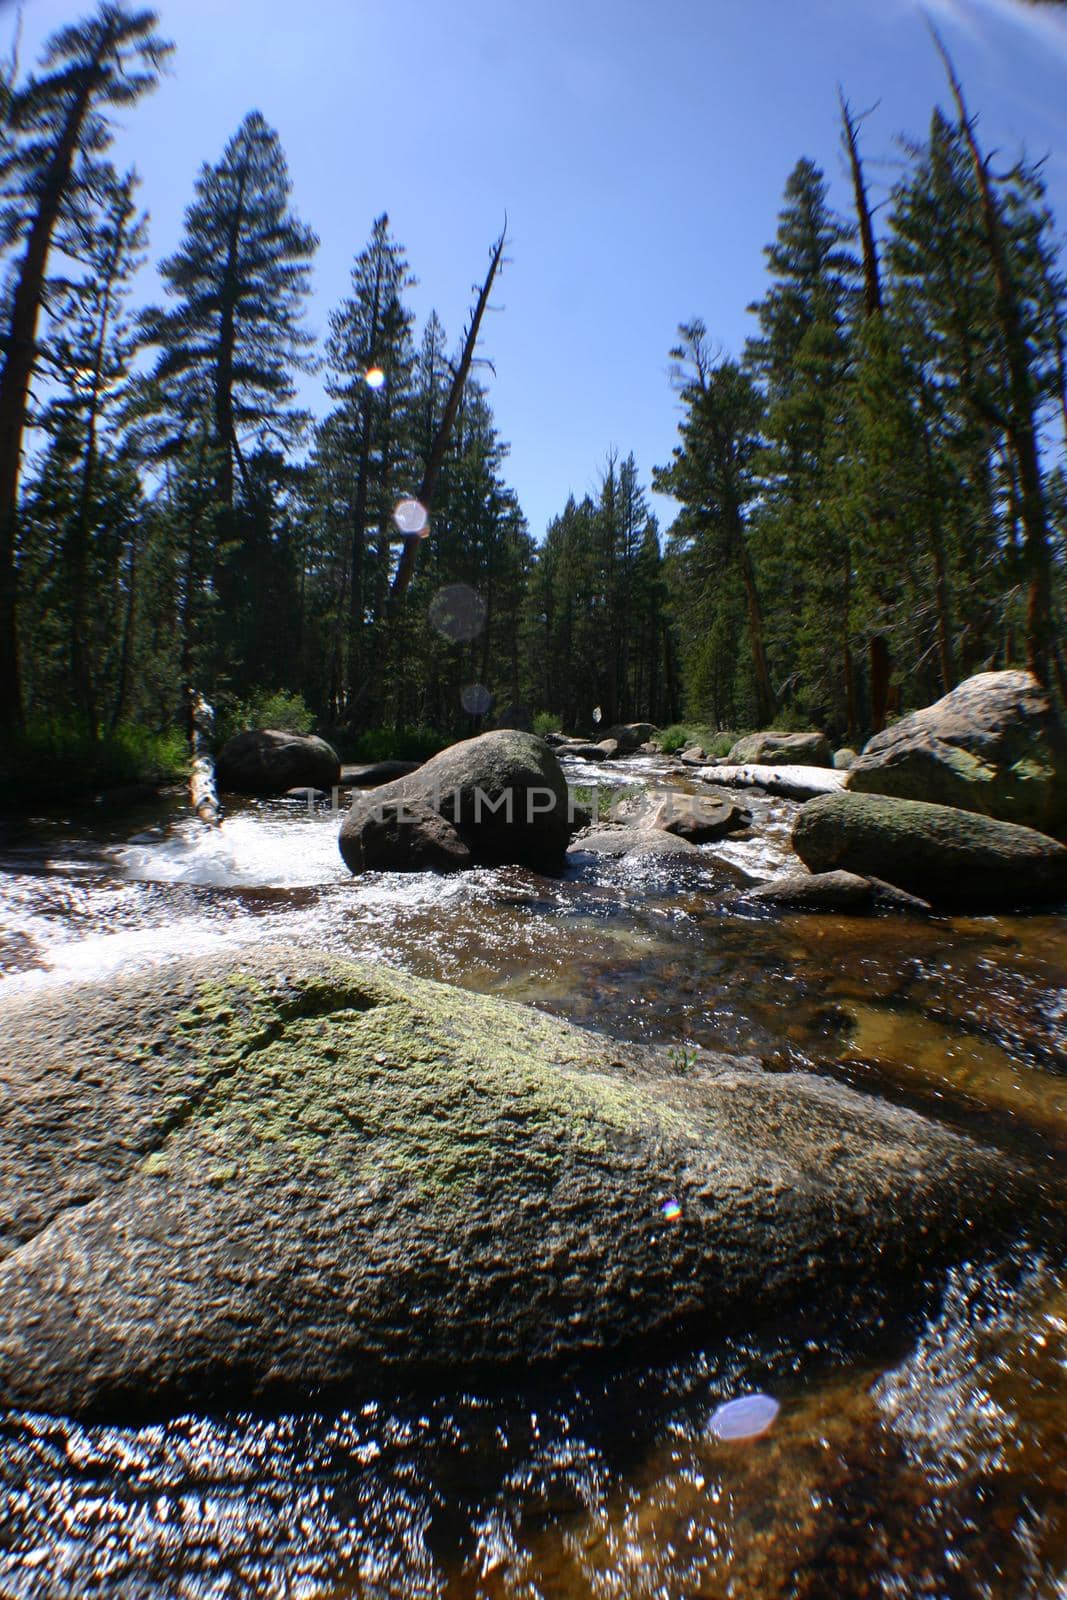 Worm's eye view of a rocky river with large evergreen trees in the background by njproductions